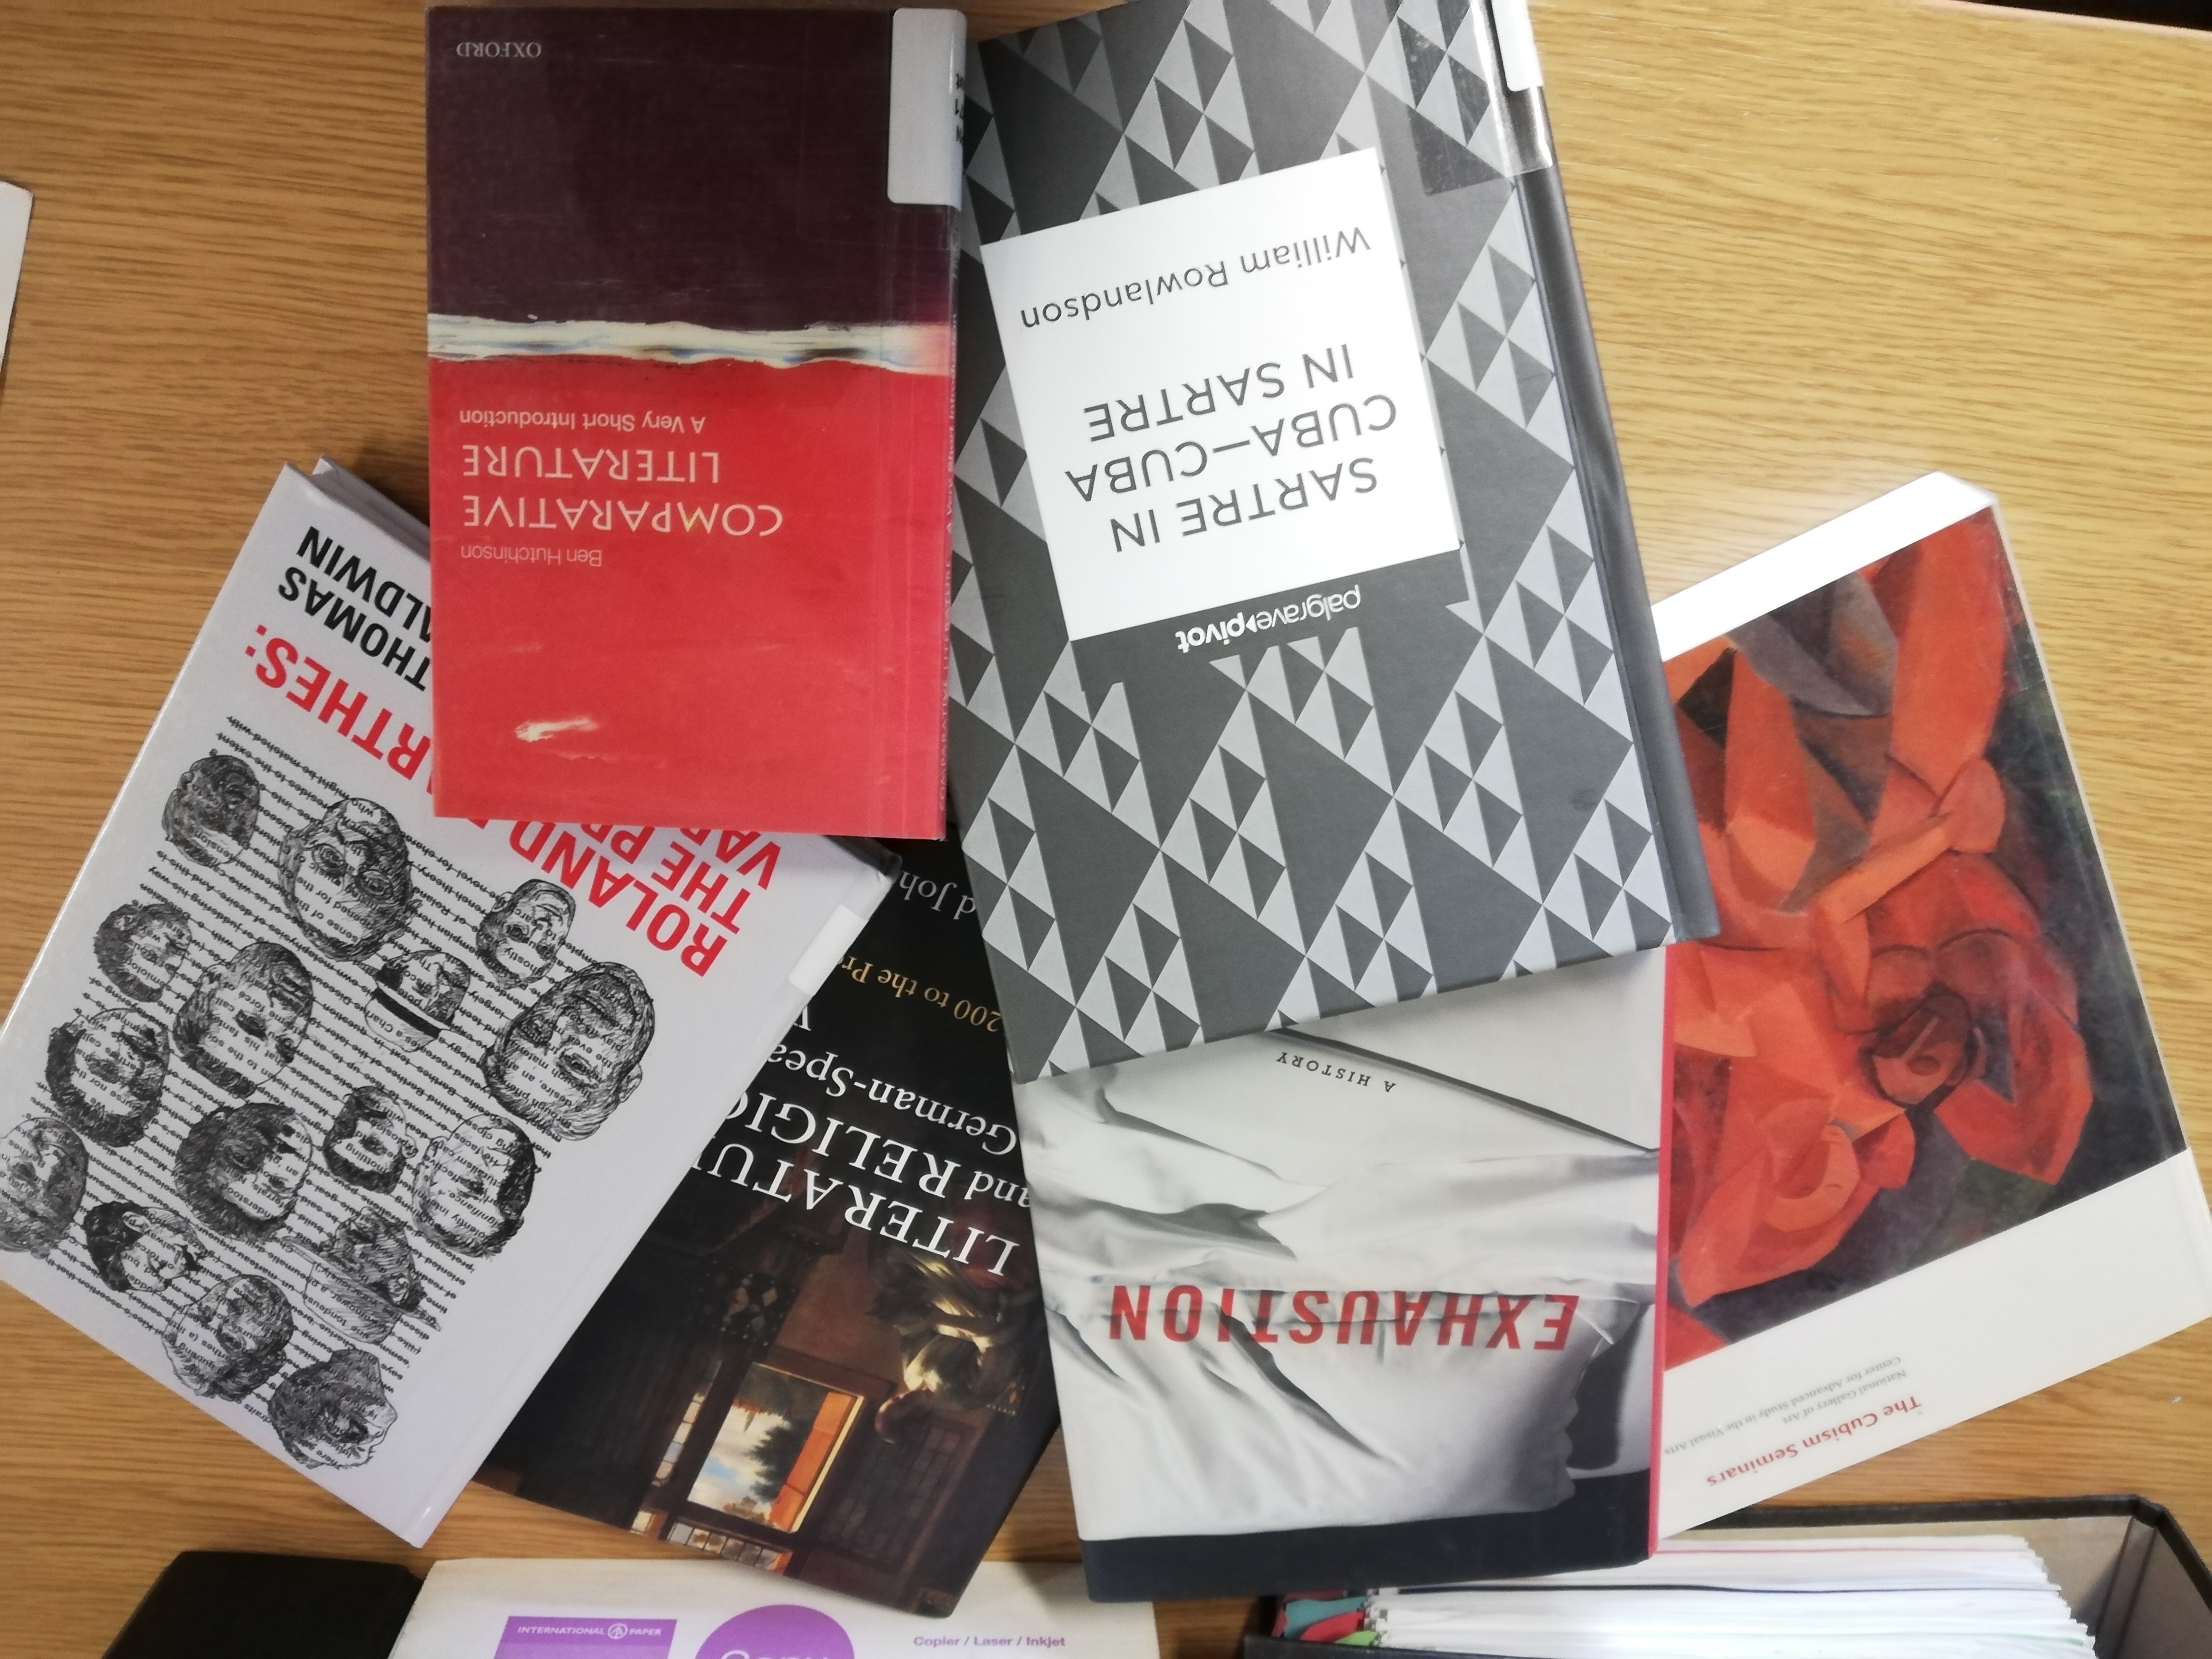 Photo showing selection of books to demonstrate visual appeal of book covers and range of titles